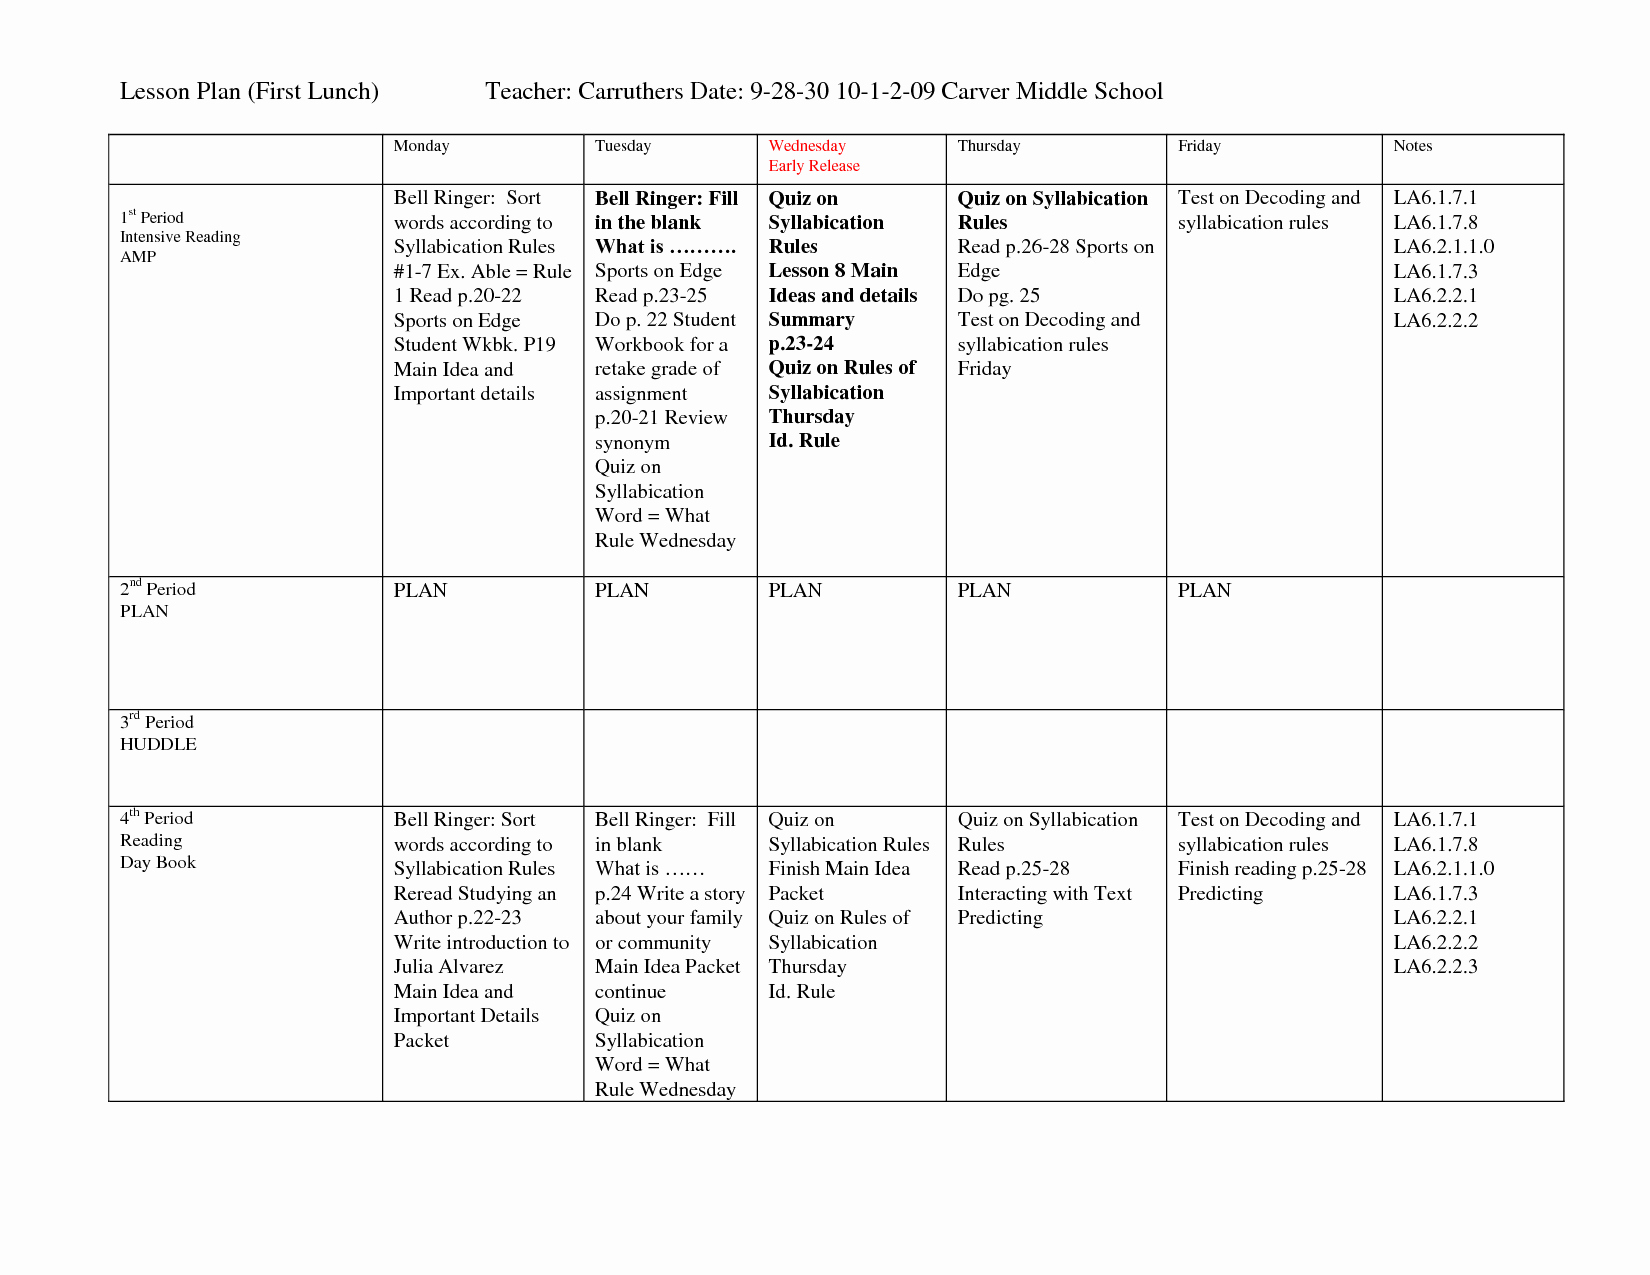 010 Blank Lesson Plan Template Word Ideas Shocking Pe Weekly Throughout Words Their Way Blank Sort Template